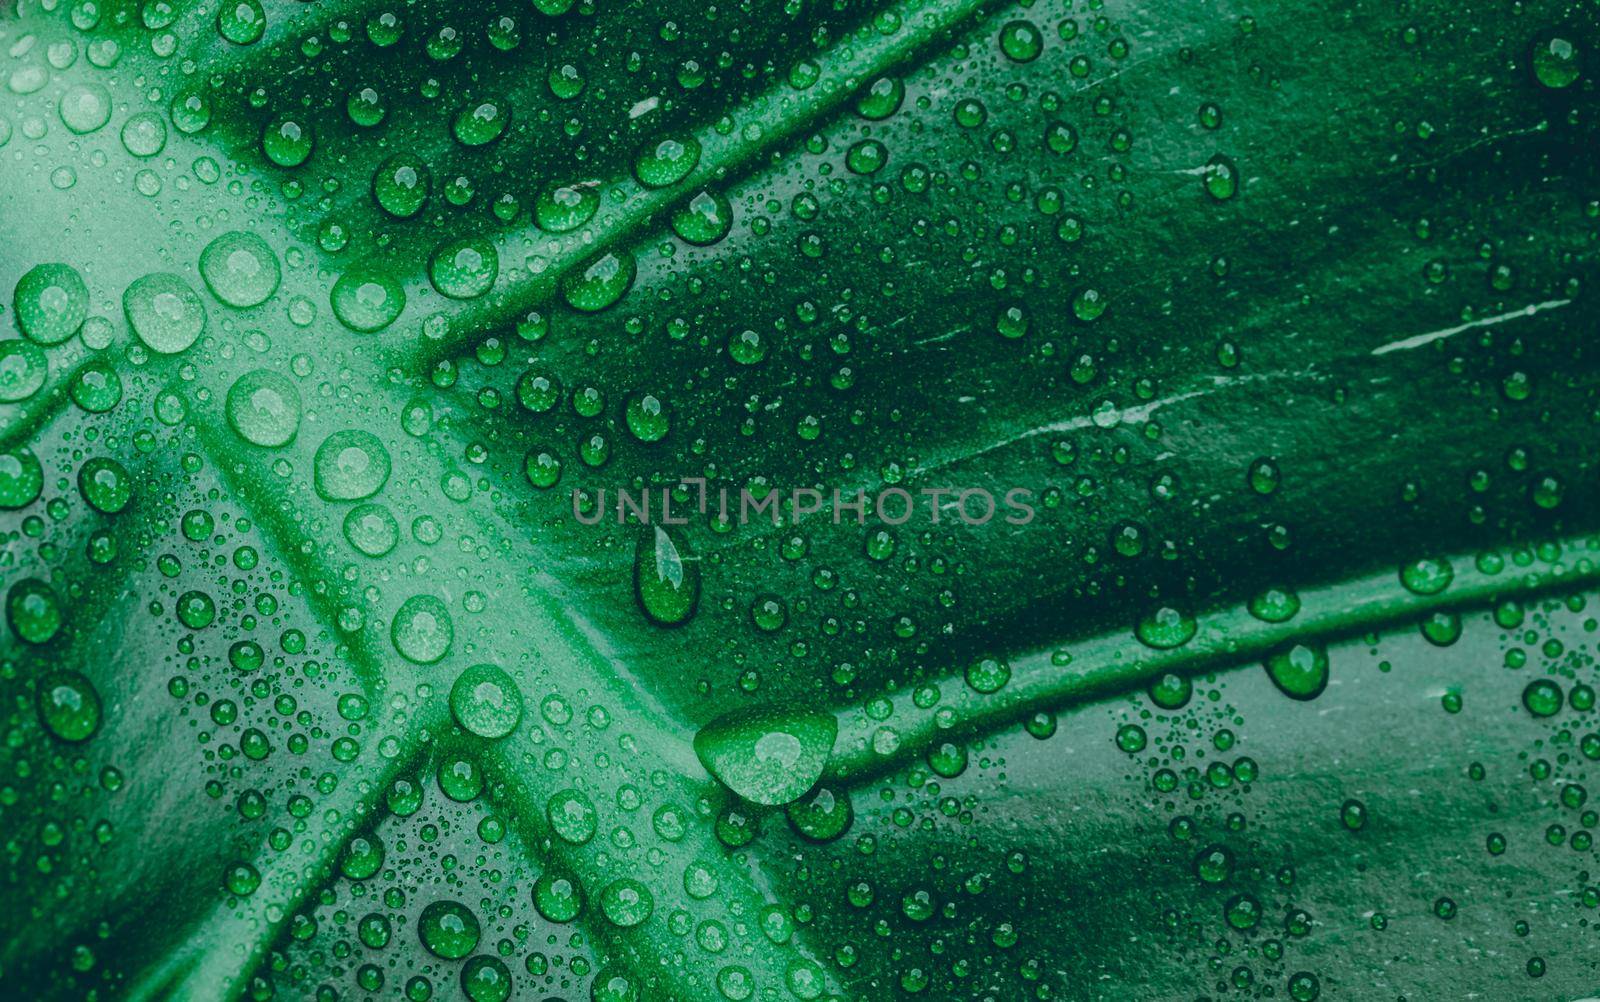 Drop water on leaf by Wasant